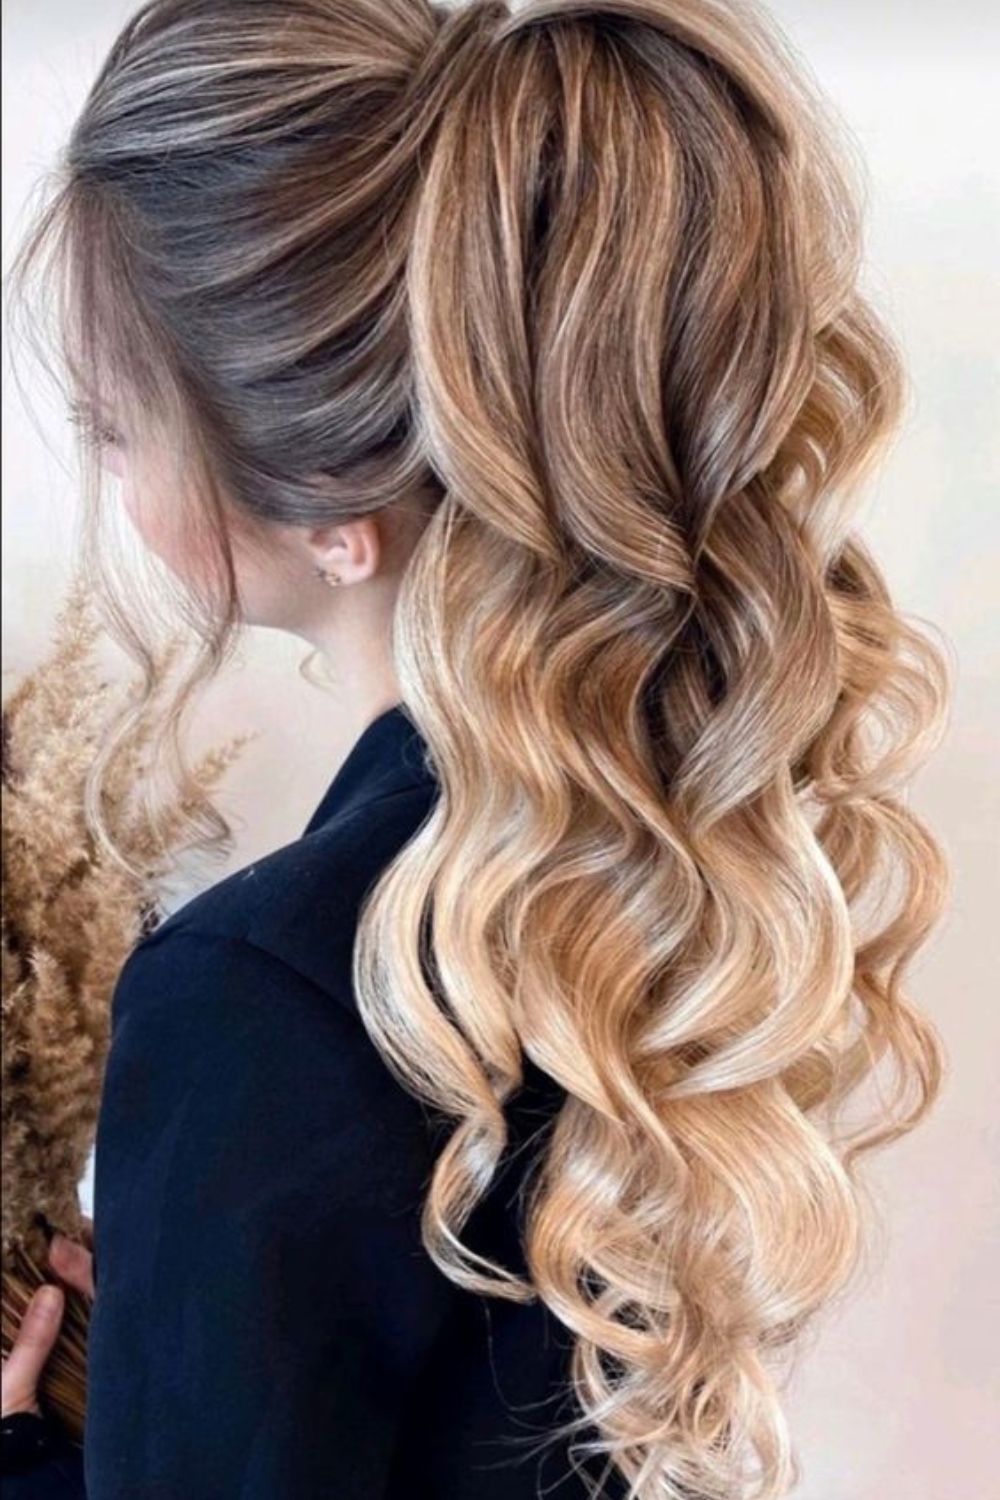 How to make this hairstyle?Or at least what is it called? I mean a high,  short, fluffy ponytail : r/HairStyleAdvice